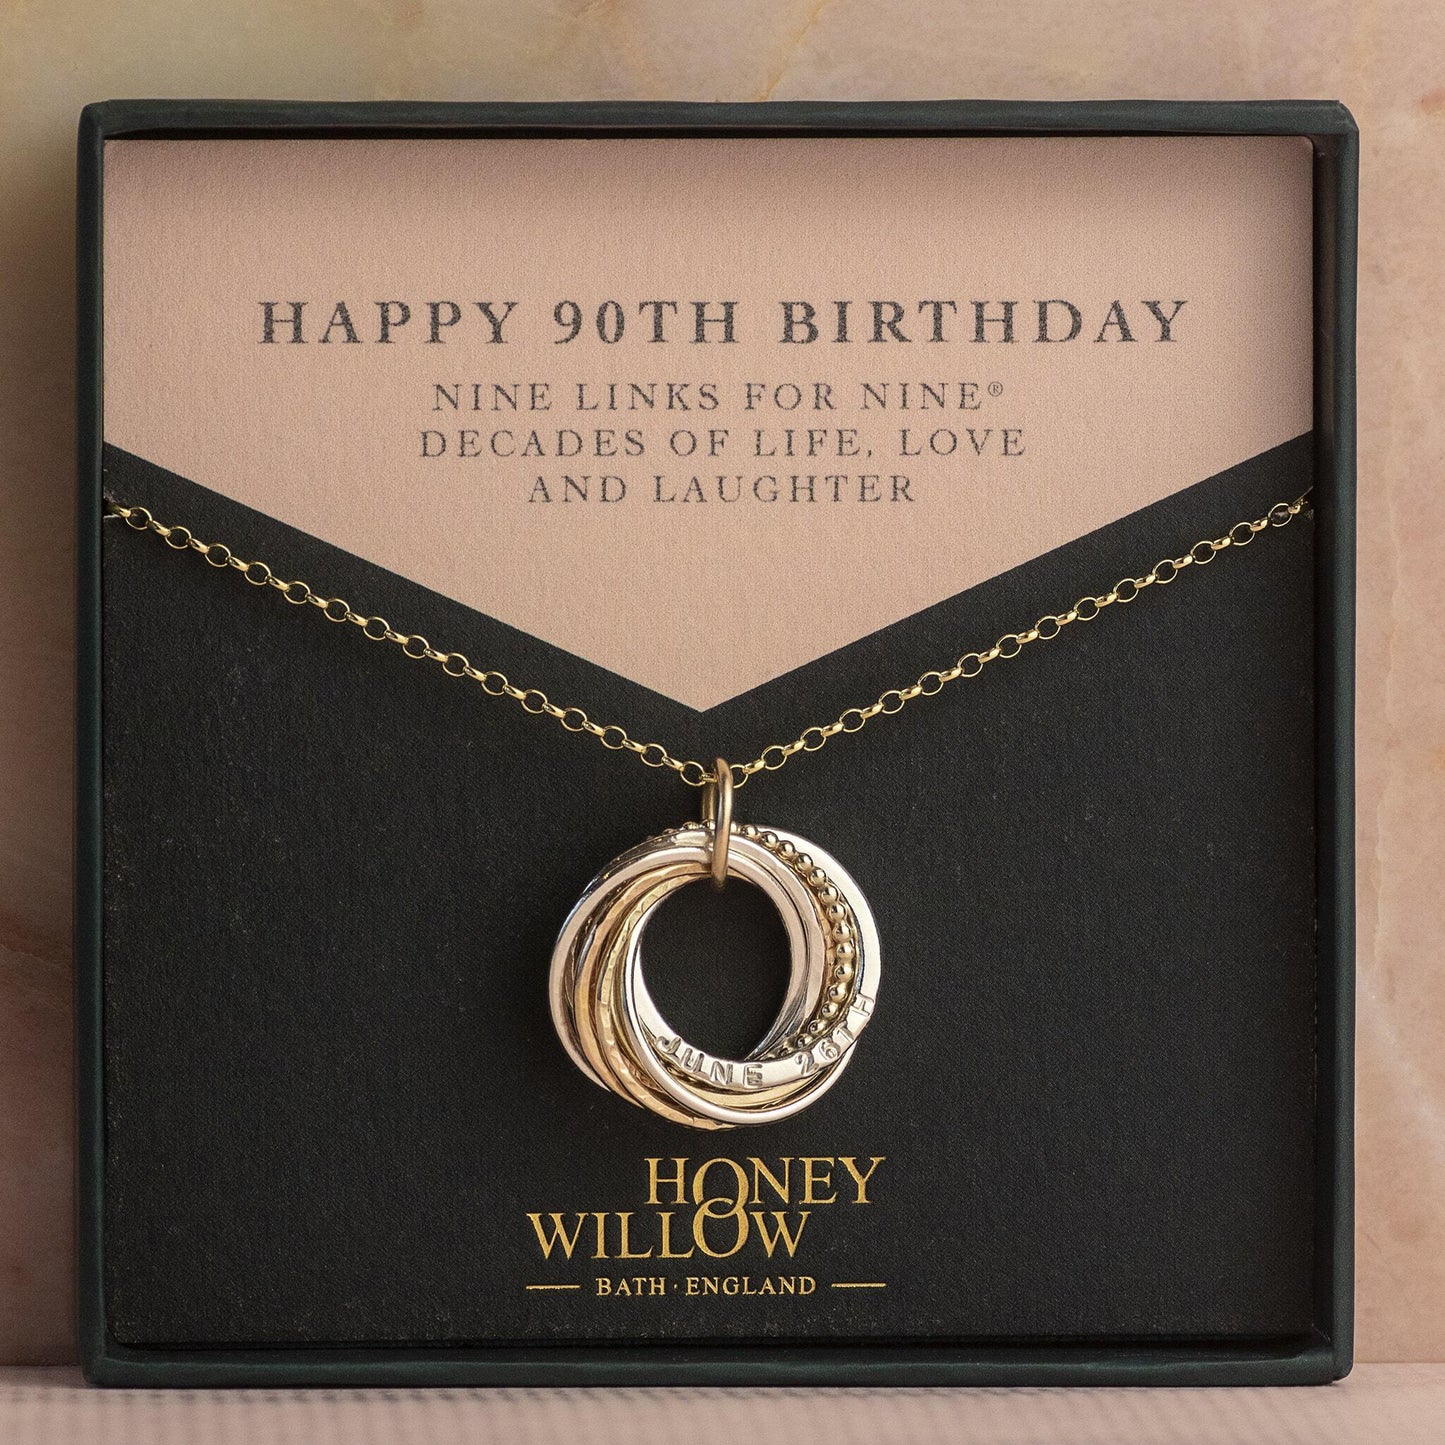 9kt Gold Personalised 90th Birthday Necklace - Hand-Stamped - The Original 9 Links for 9 Decades Necklace - Recycled Rose Gold, Recycled Yellow Gold & Silver